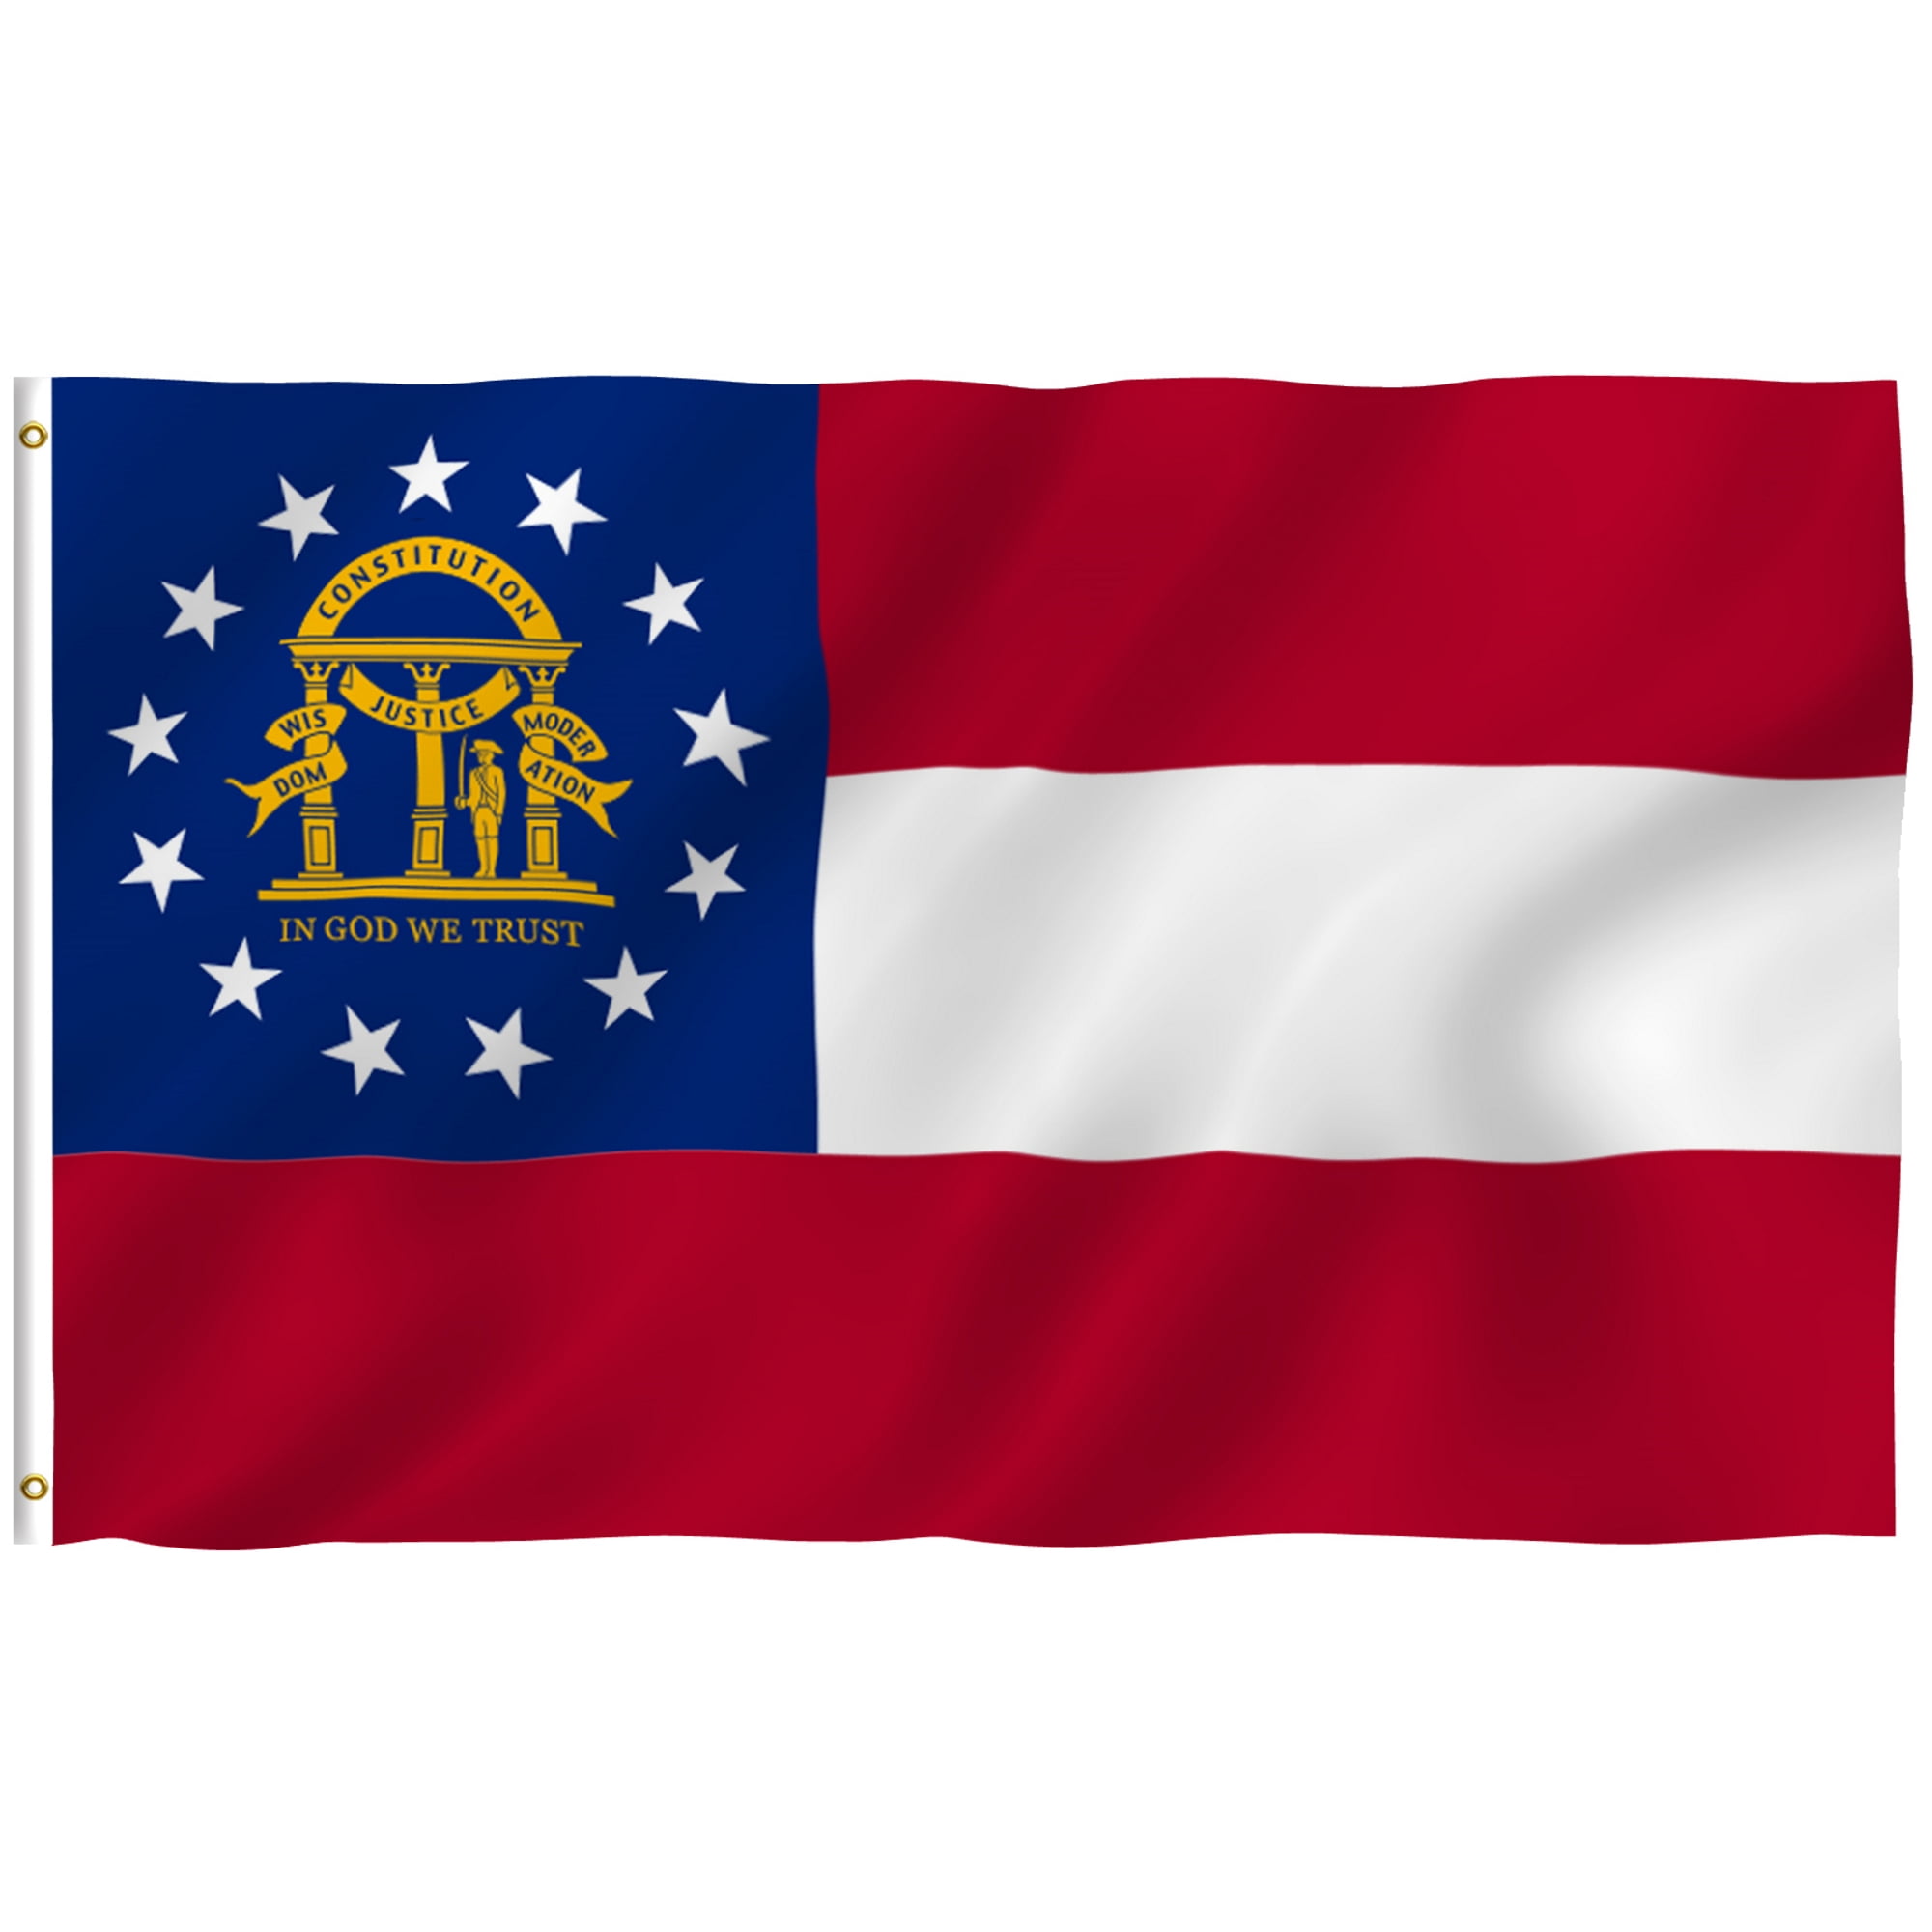 ANLEY North Carolina State Flag NC Banner States of US Flags Polyester 3x5 Foot 